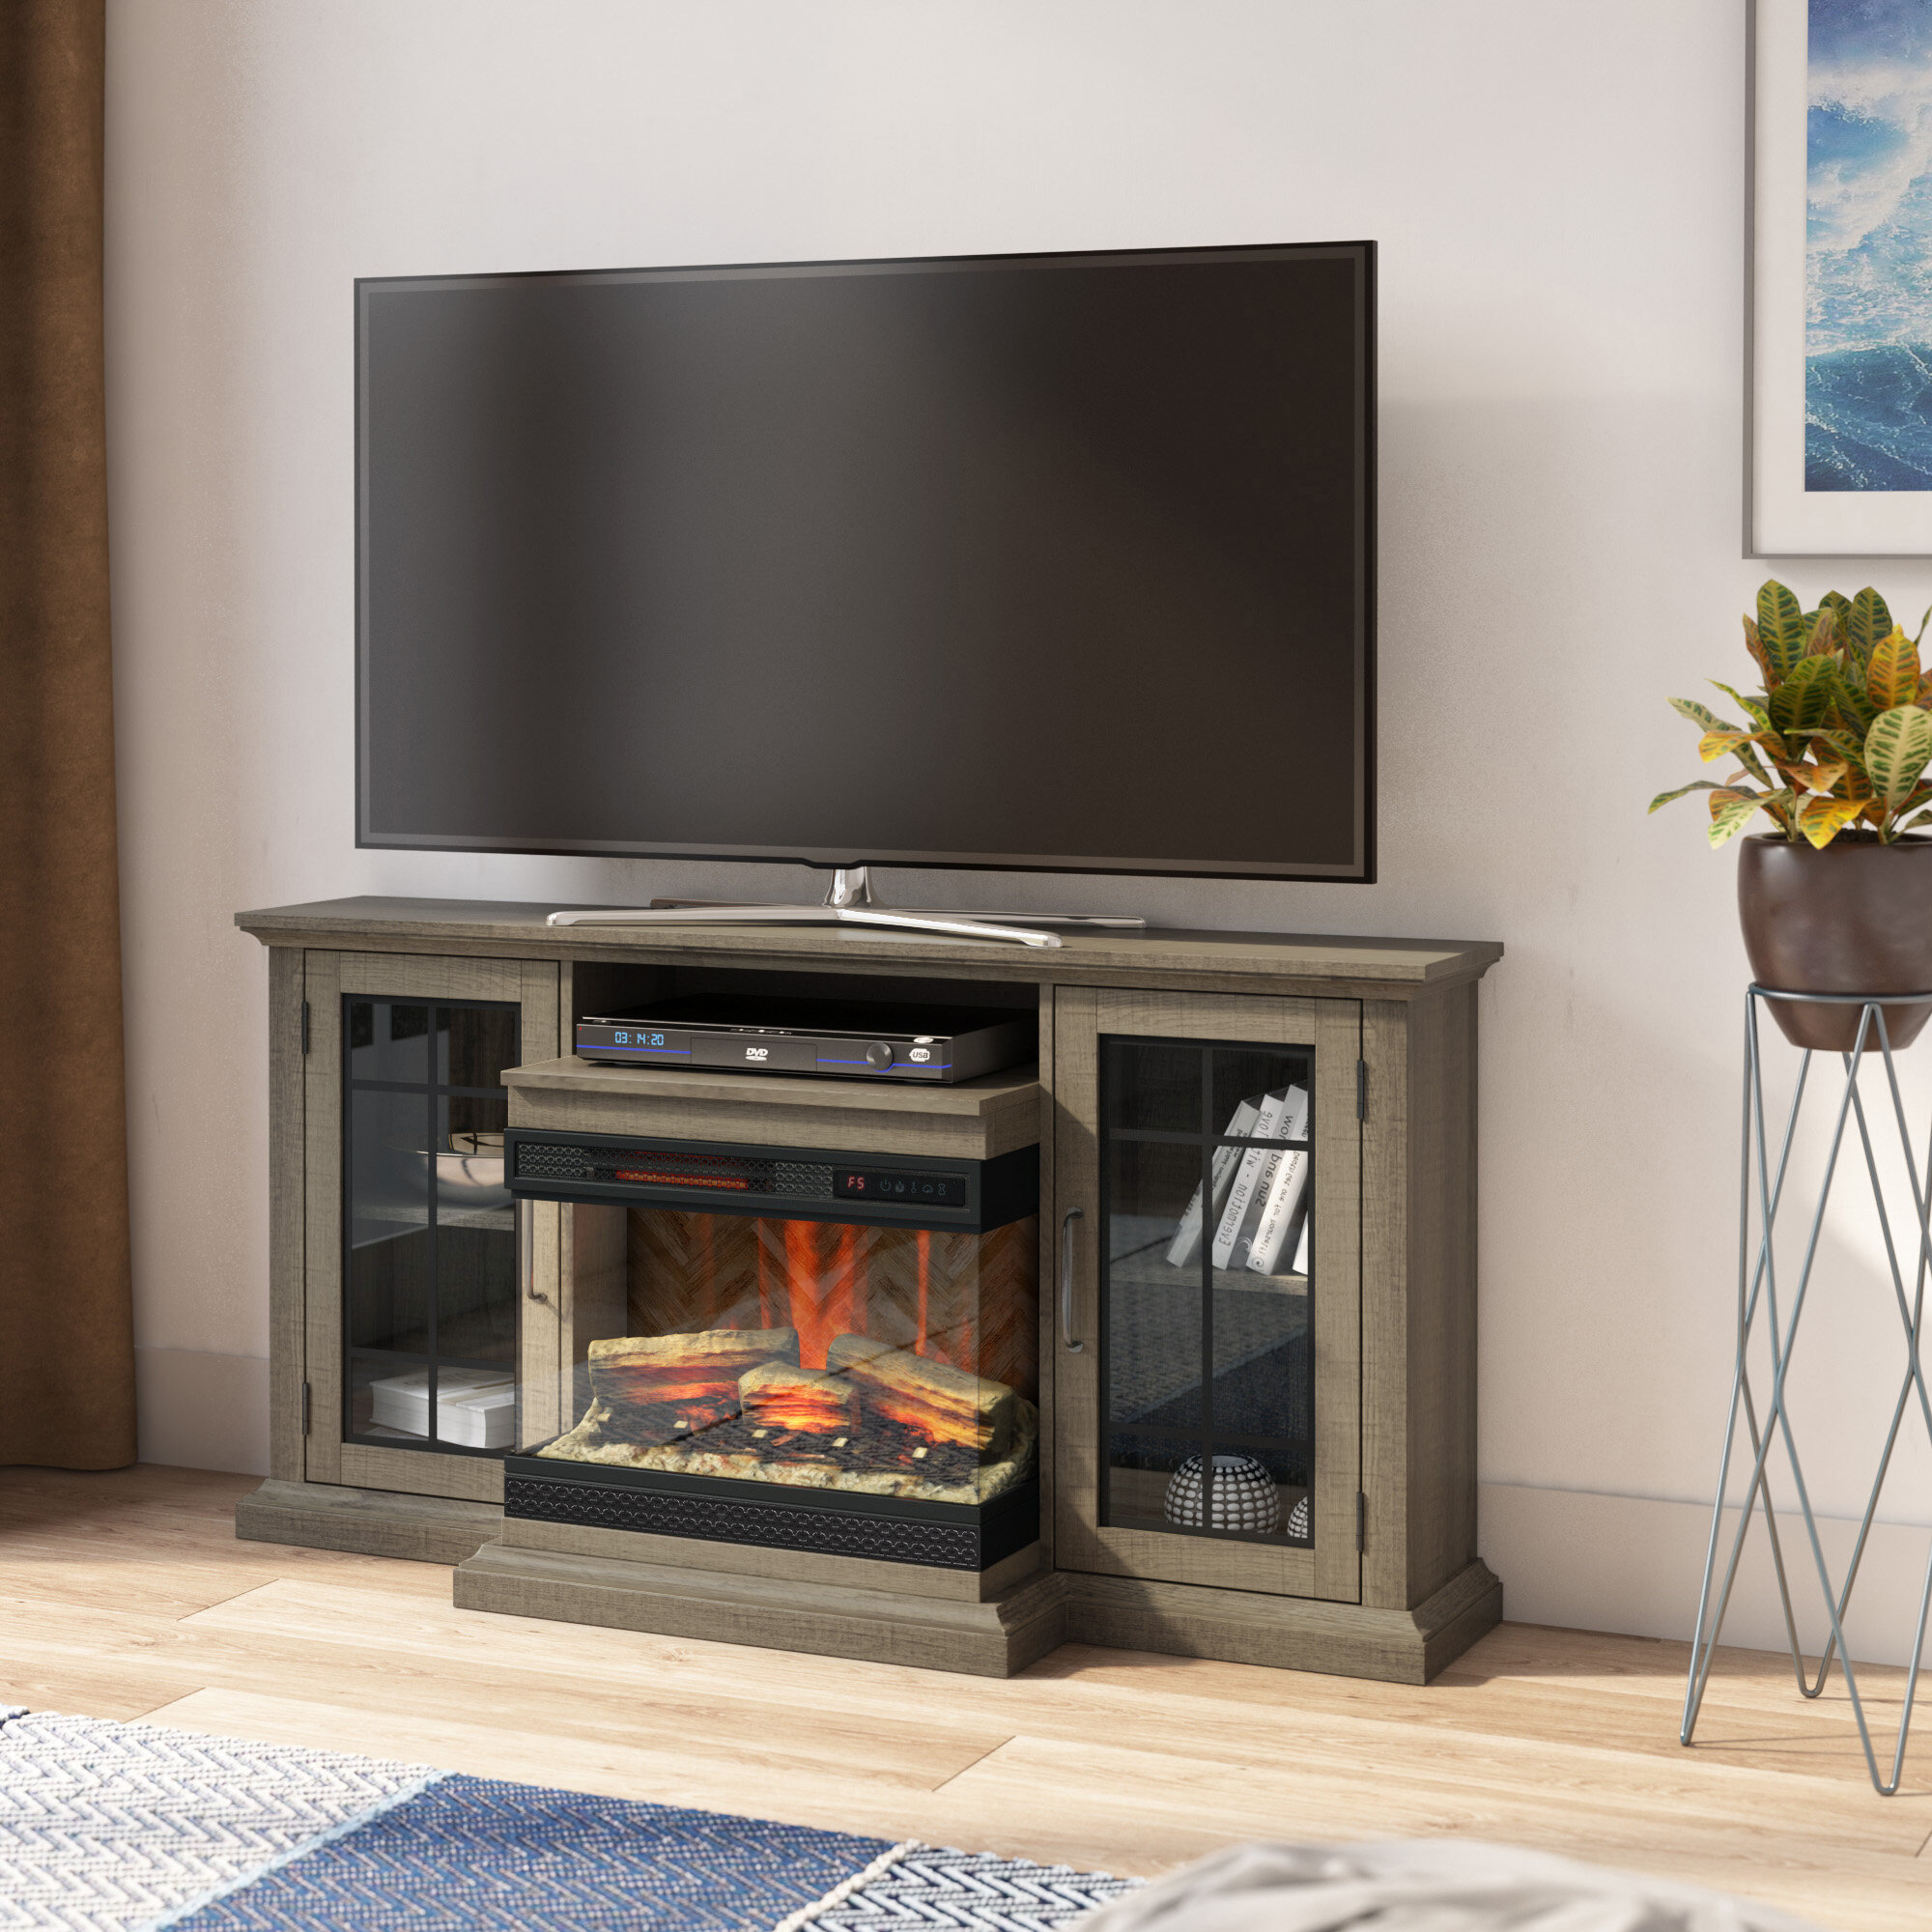 Gretchen TV Stand for TVs up to 65" with Electric Fireplace Included